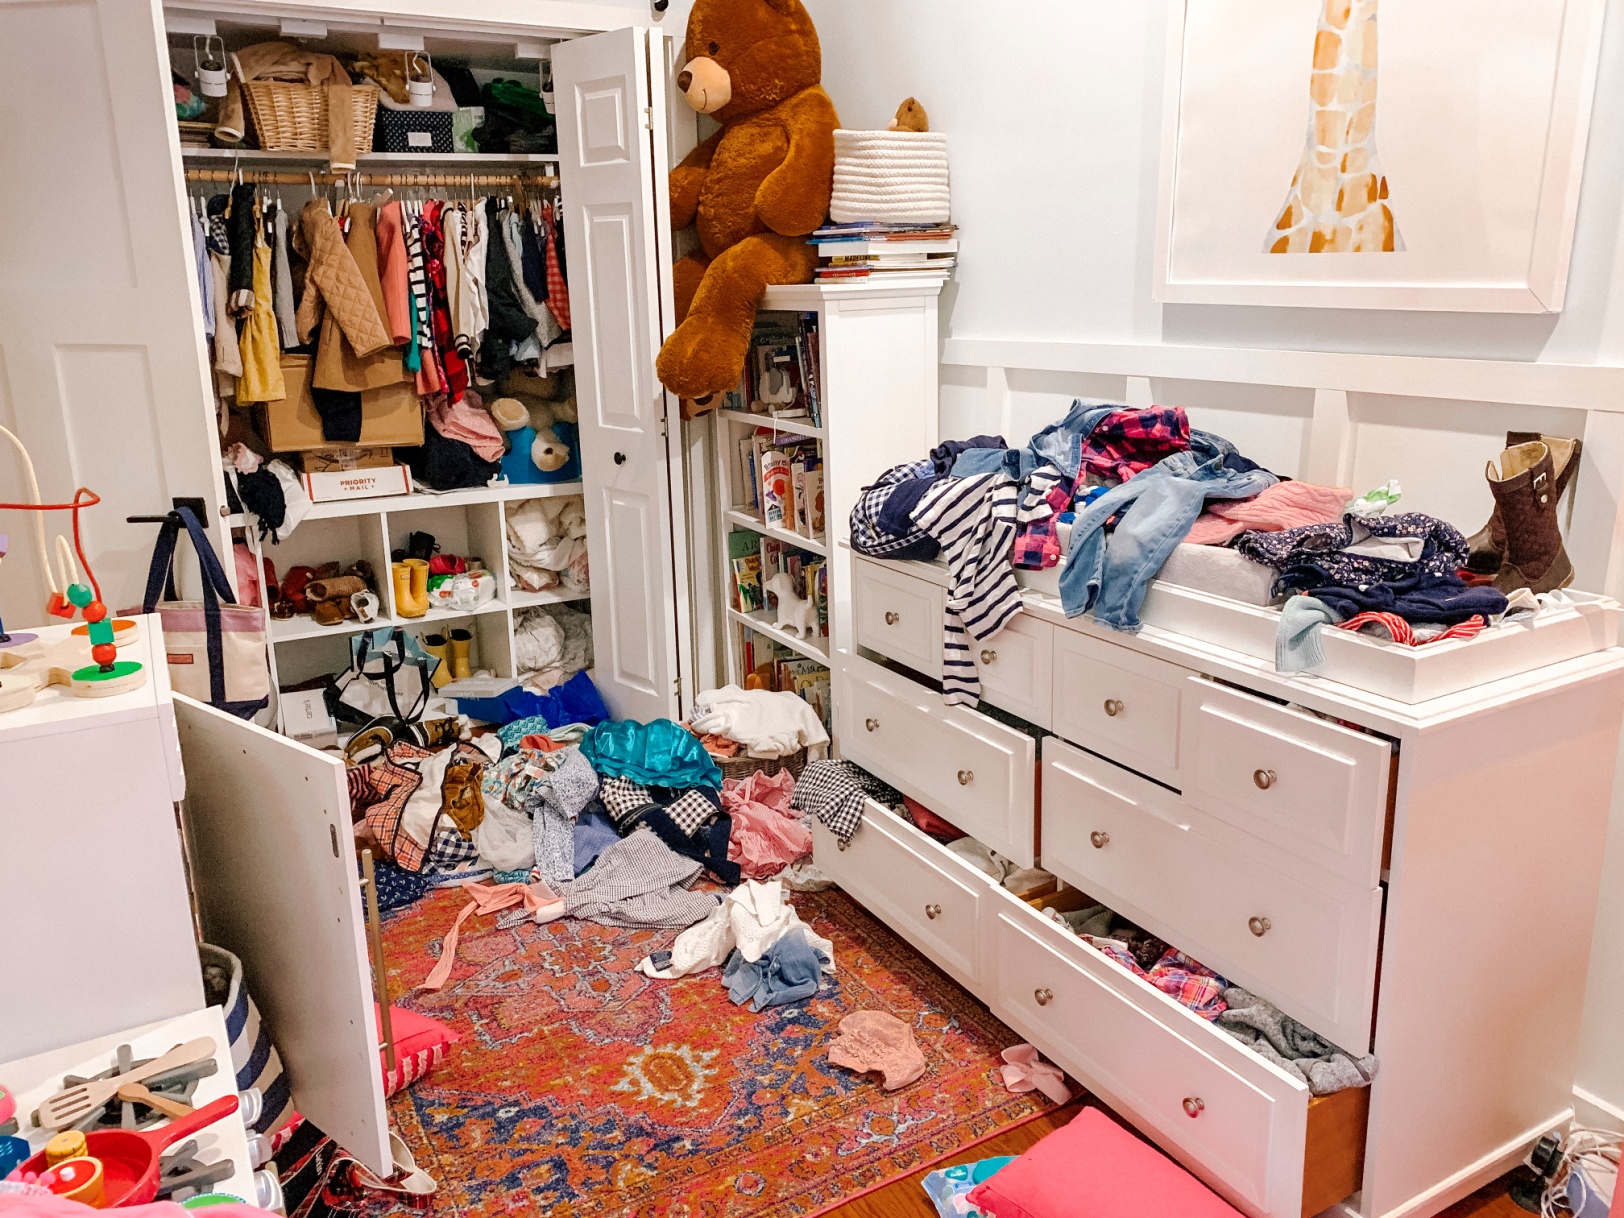 https://kellyinthecity.s3.amazonaws.com/wp-content/uploads/2019/03/KonMari-Before-and-After-Photos-kids-rooms.jpg